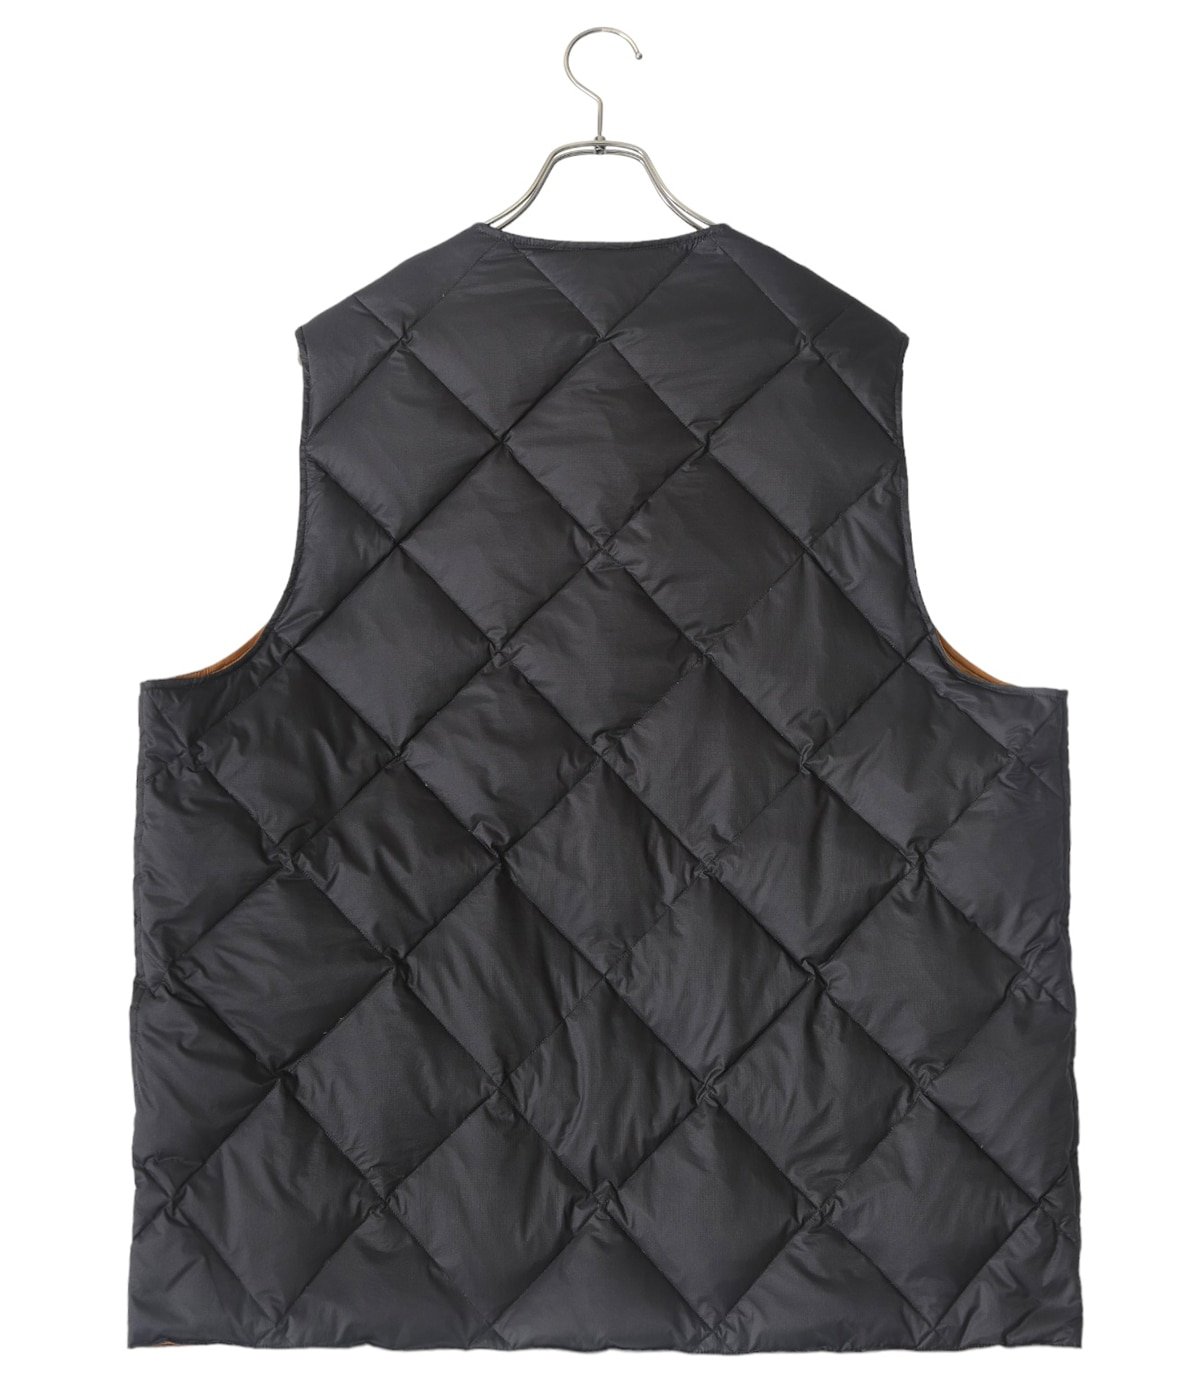 Down Light Insulated Vest